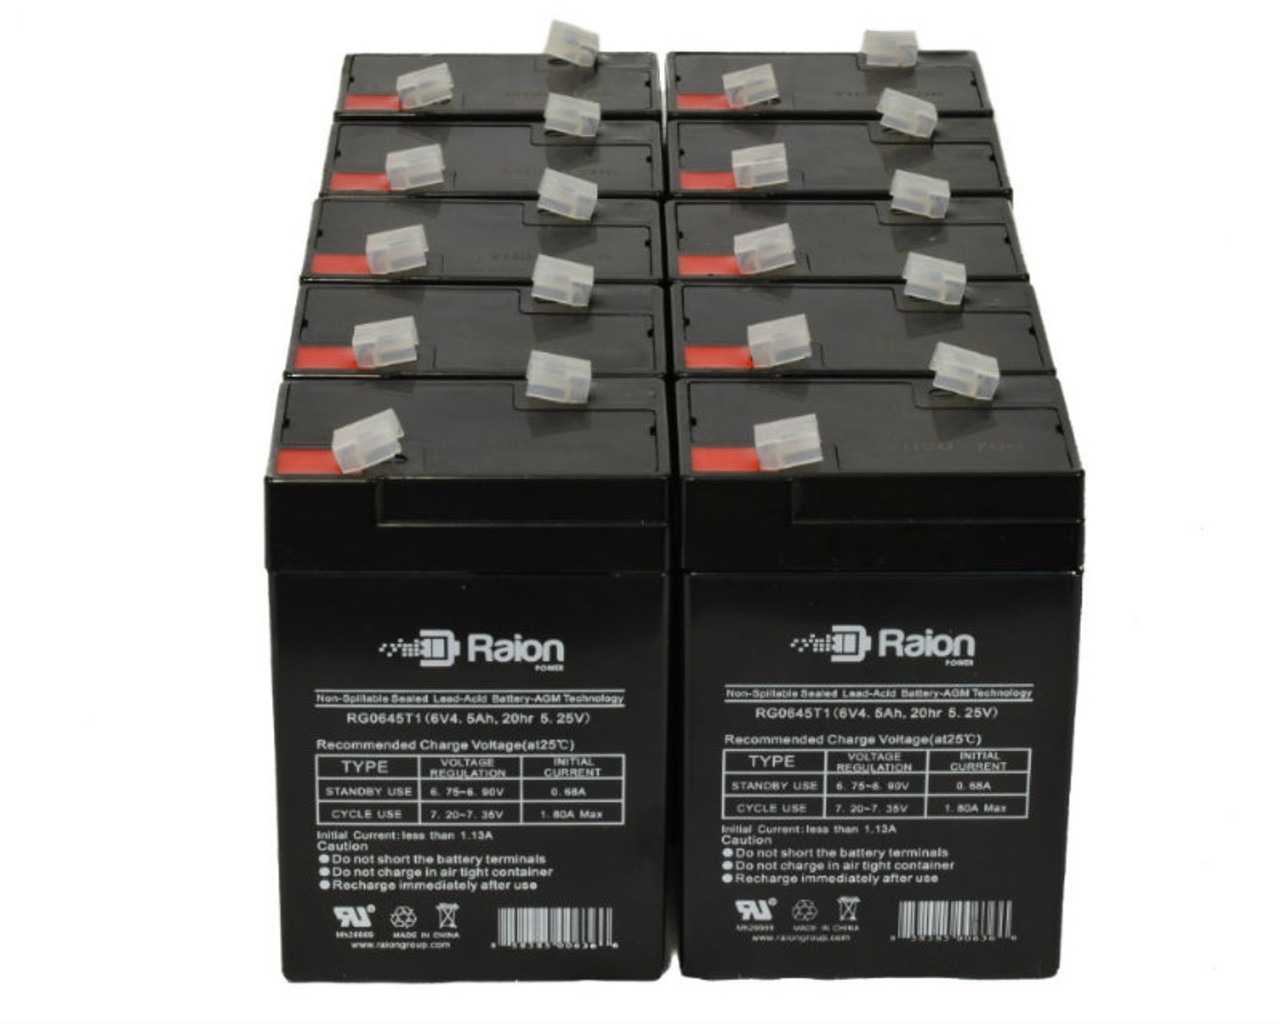 Raion Power 6V 4.5Ah Replacement Emergency Light Battery for Lithonia ELB 06042 - 10 Pack